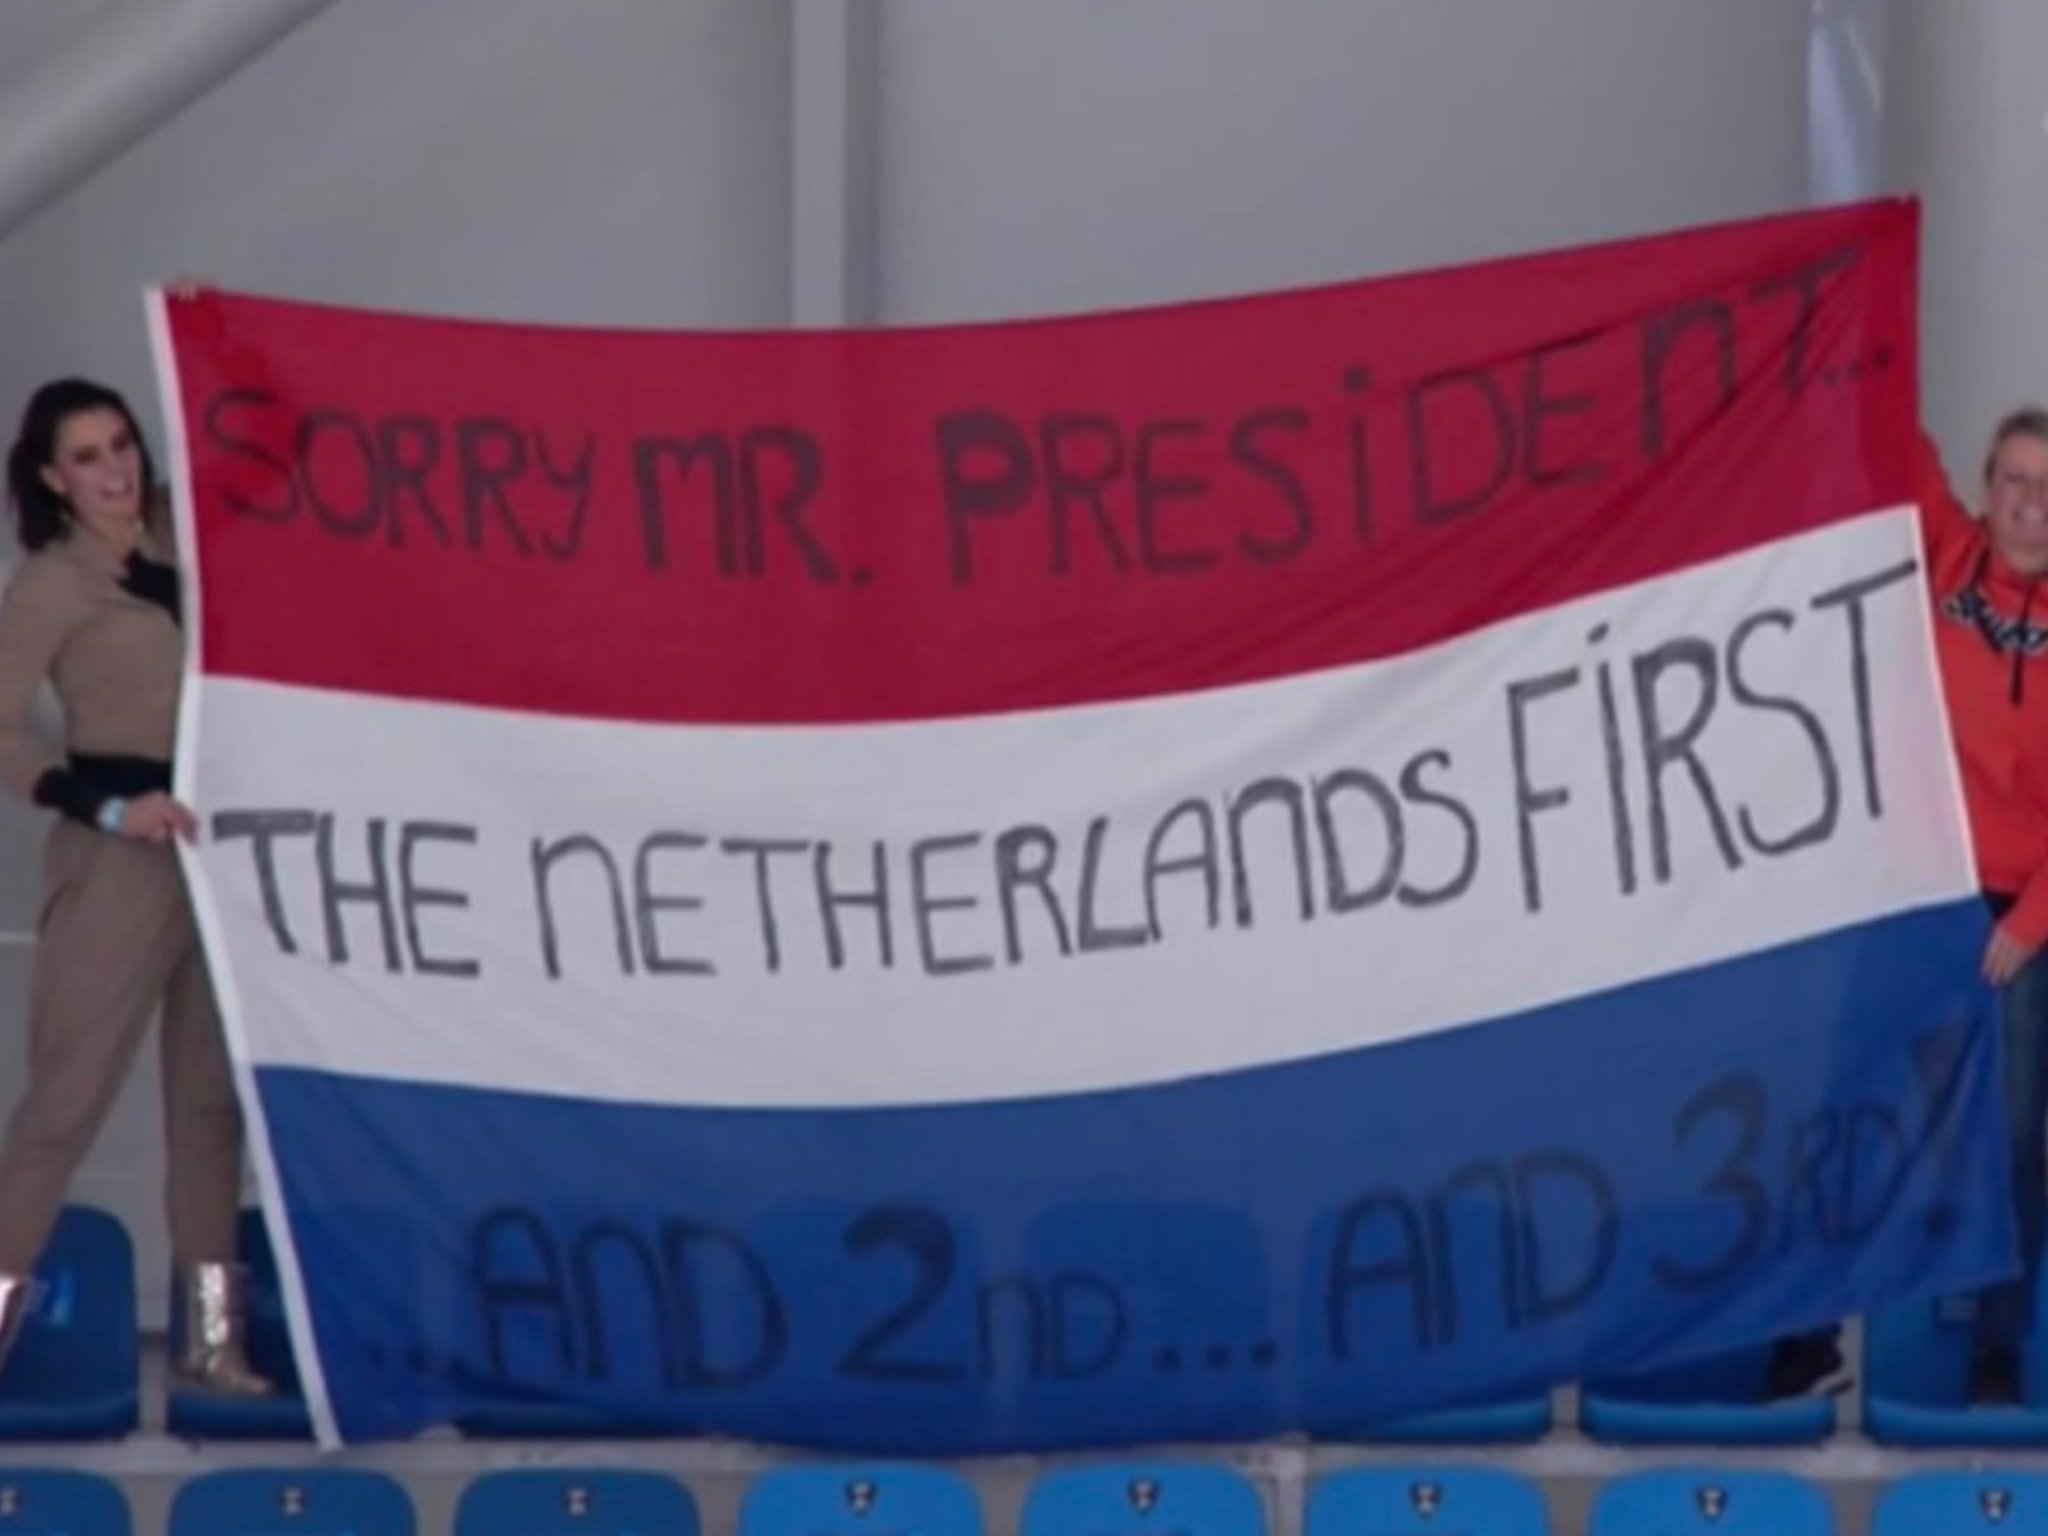 Dutch supporters expertly mocked Mr Trump's 'America first' policy